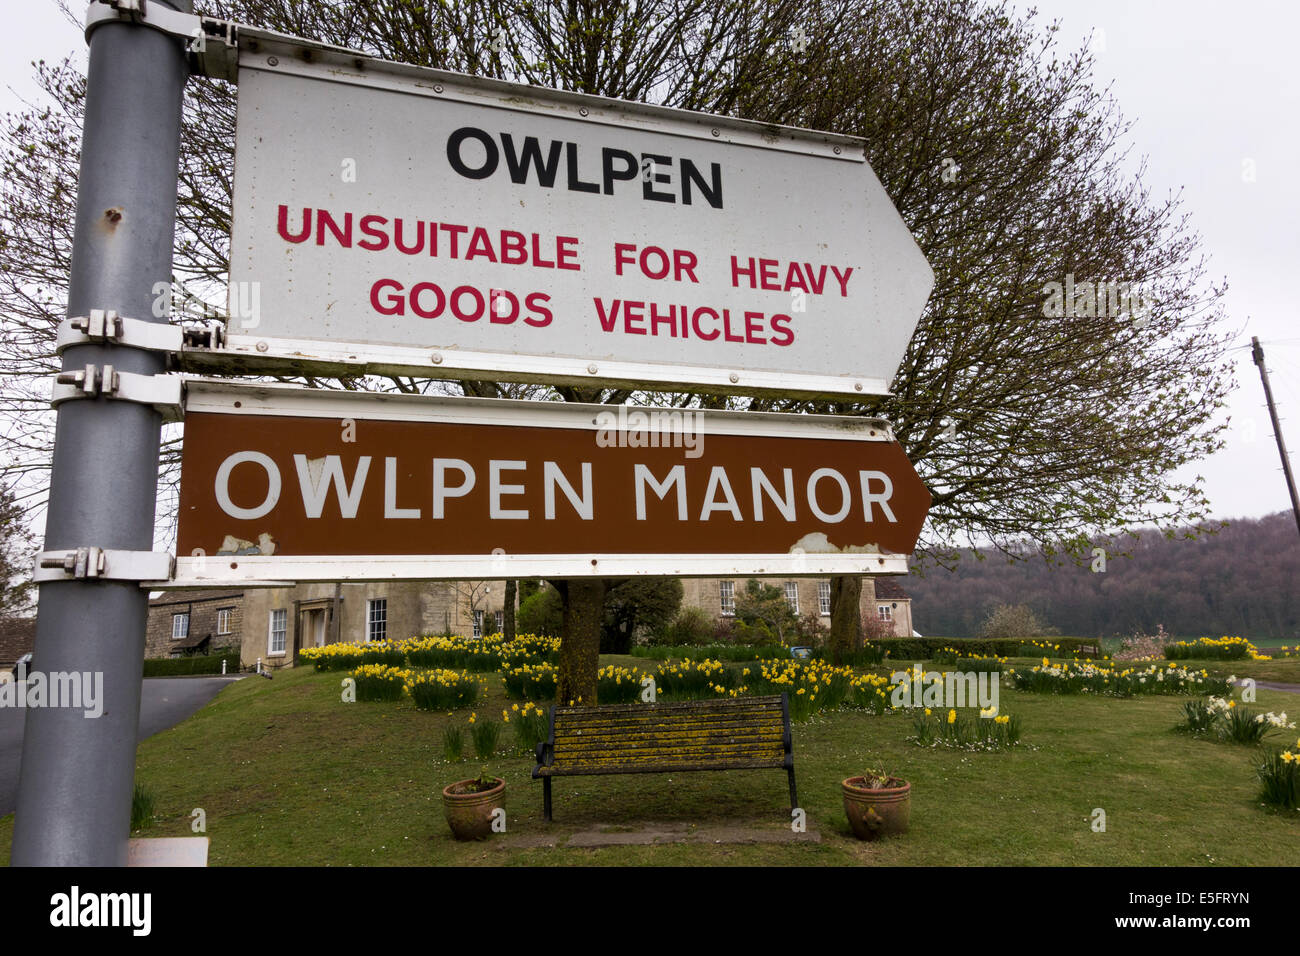 Owelpen Manor sign in Uley, Gloucestershire, UK Stock Photo